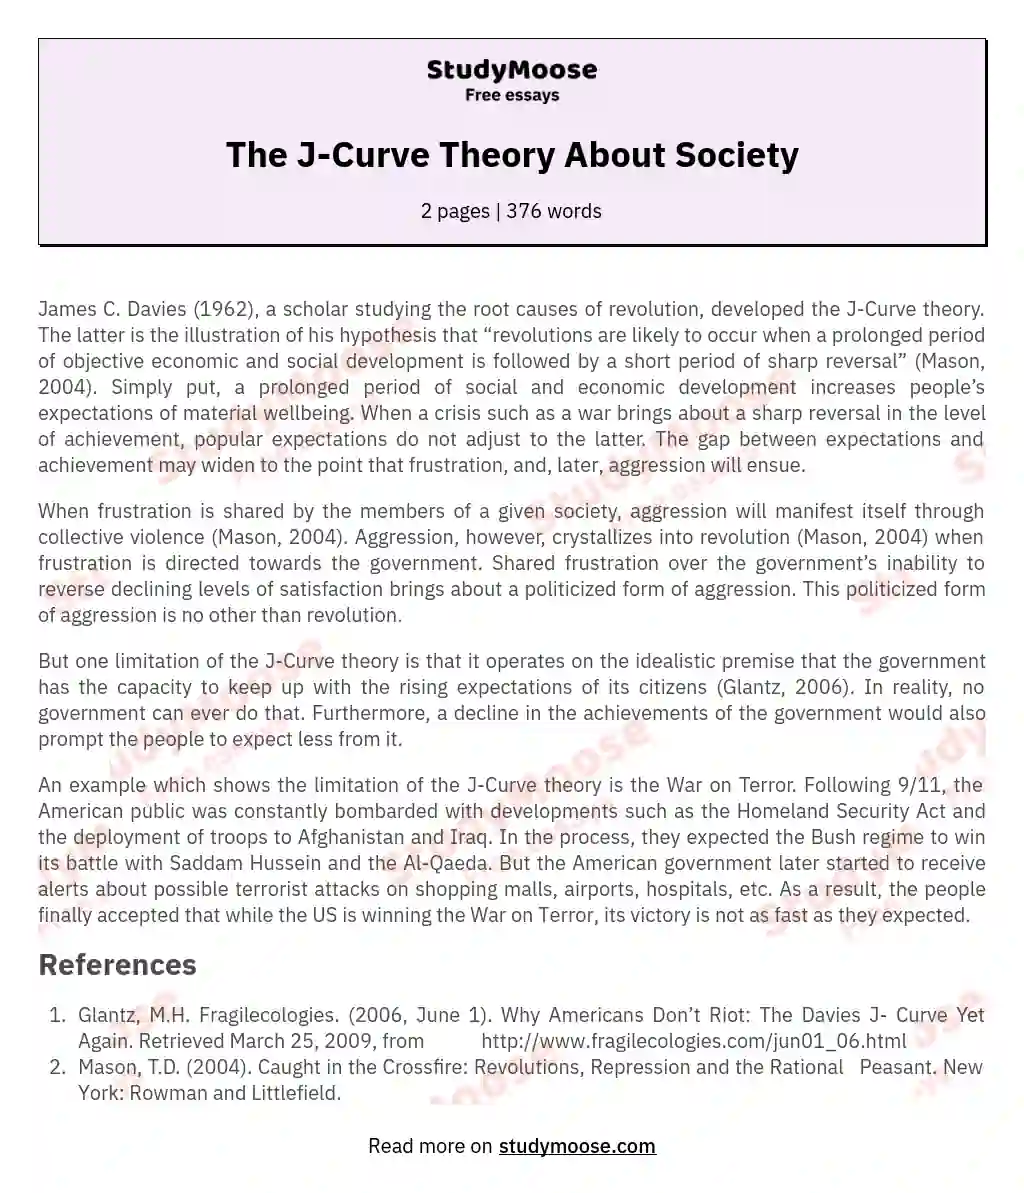 The J-Curve Theory About Society